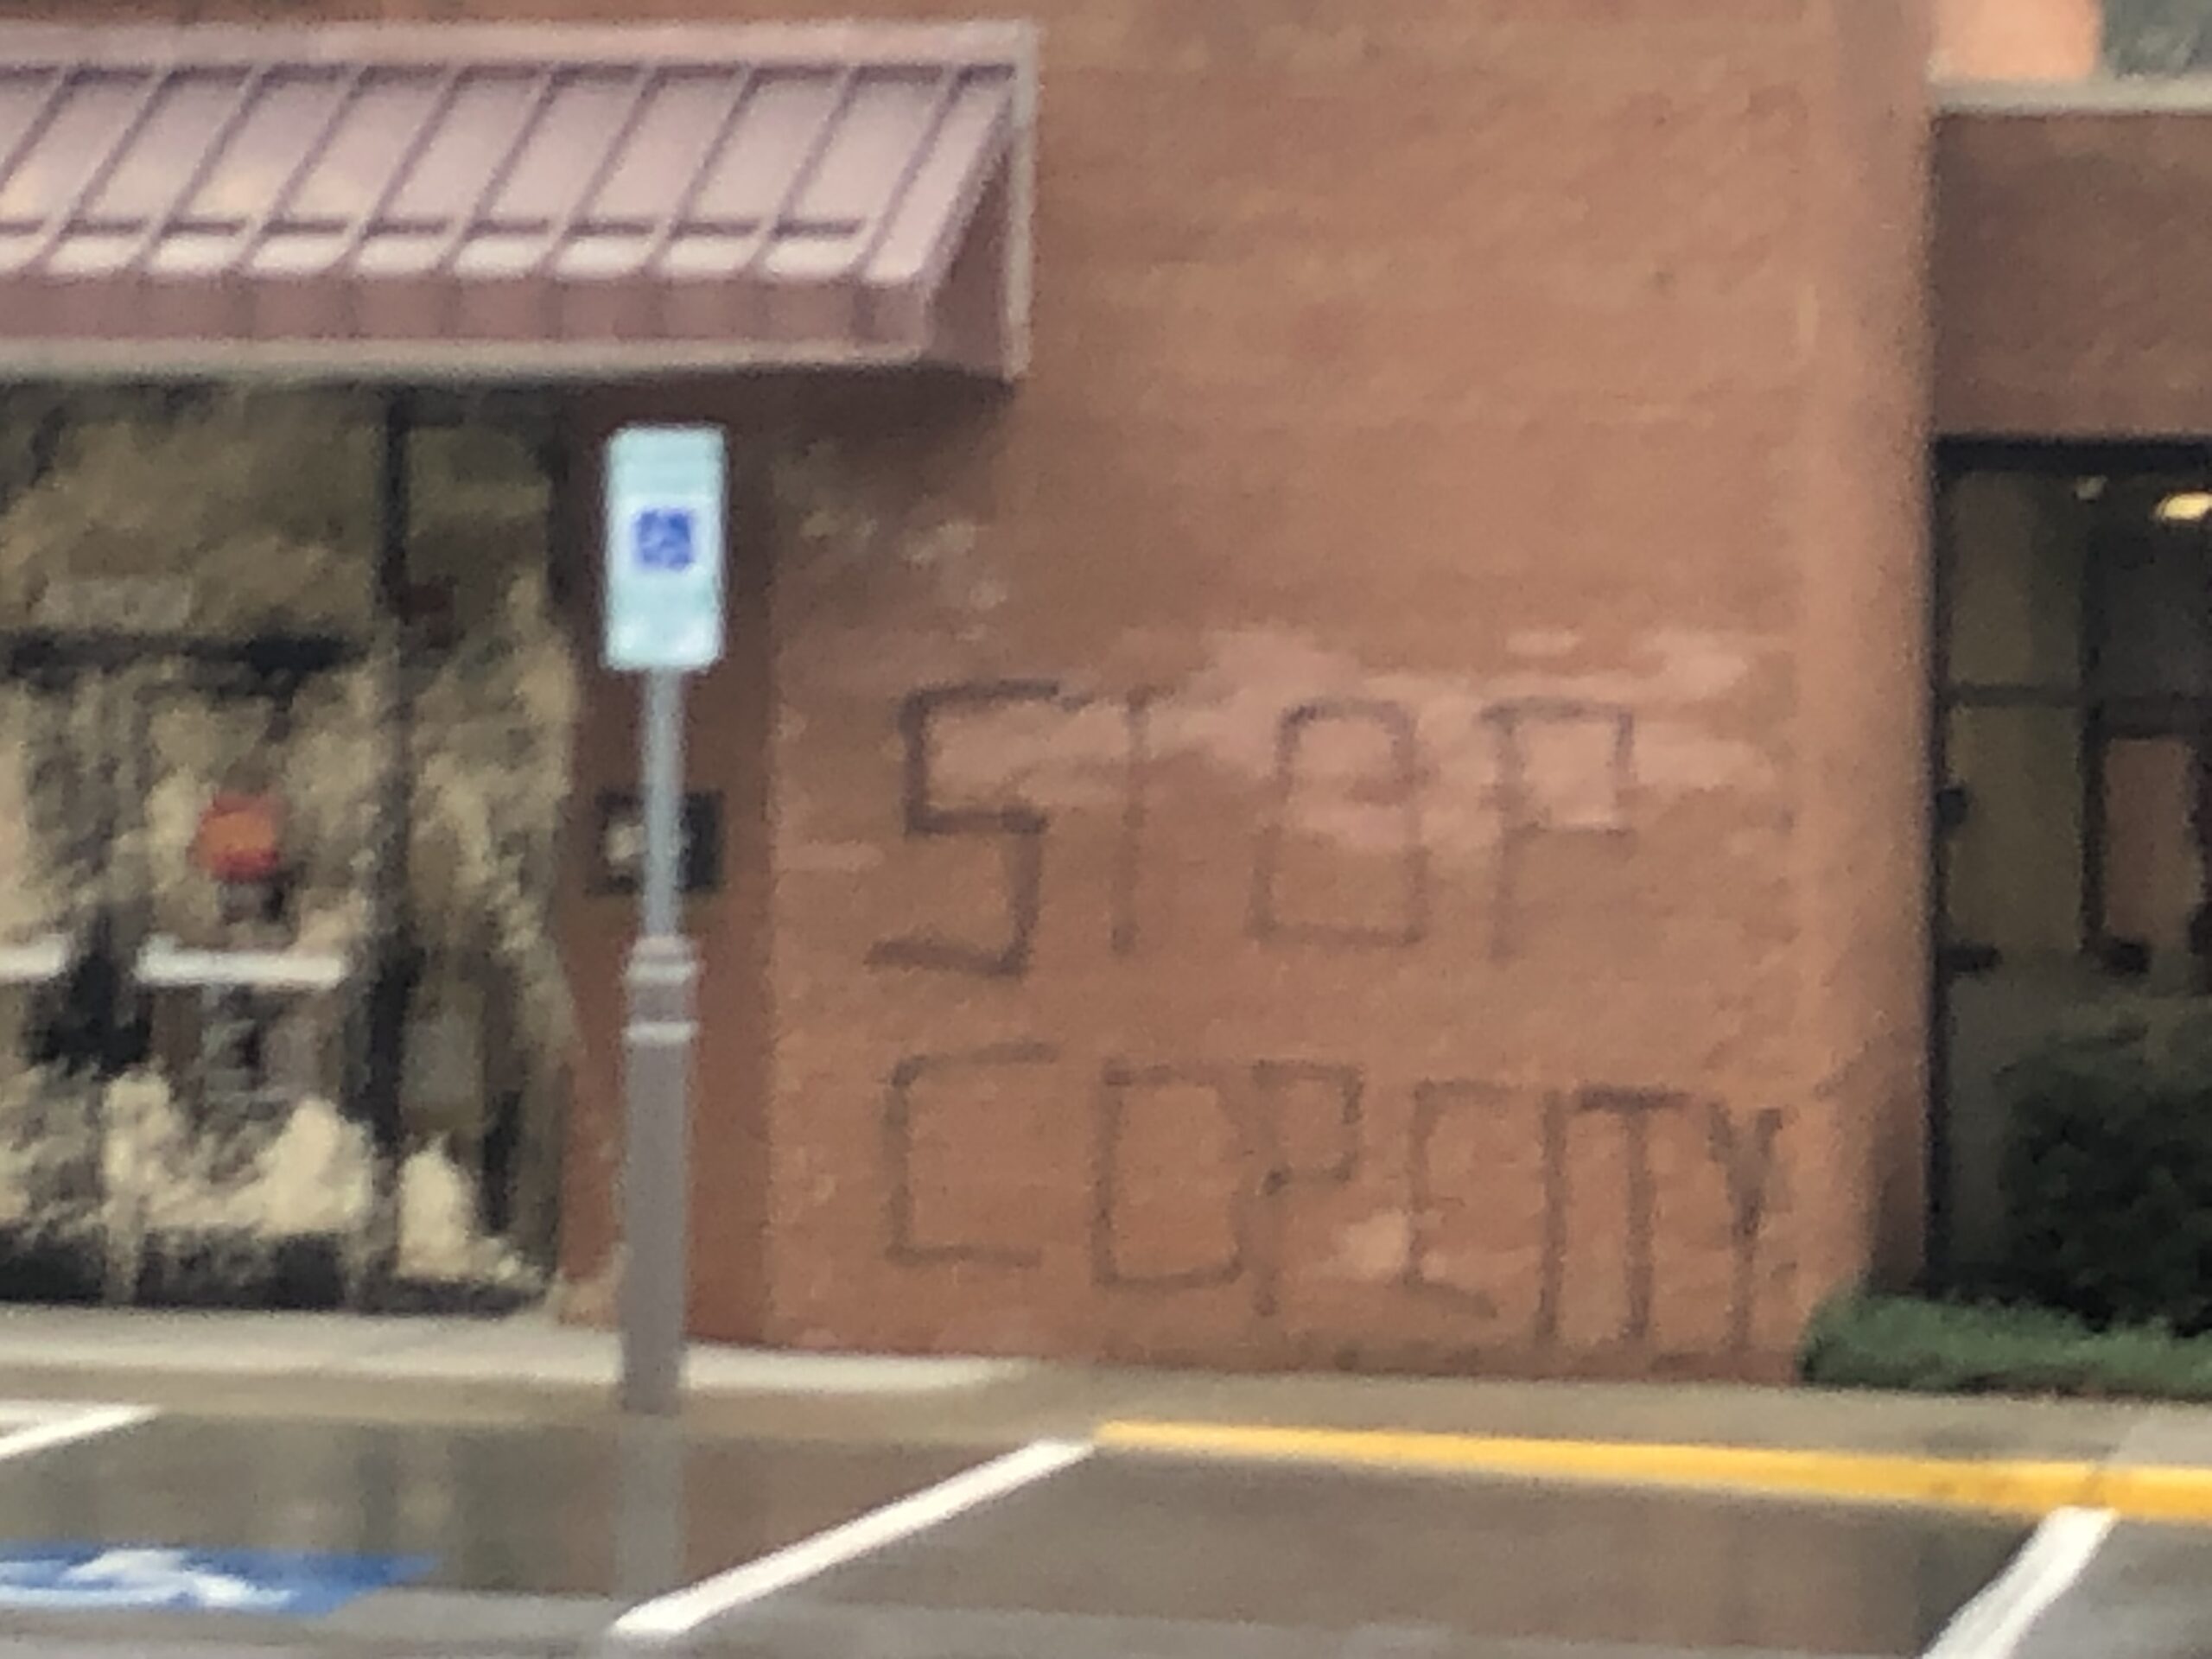 A brick wall next to a glass door with a Wells Fargo logo is tagged "STOP COP CITY" in black spray paint.